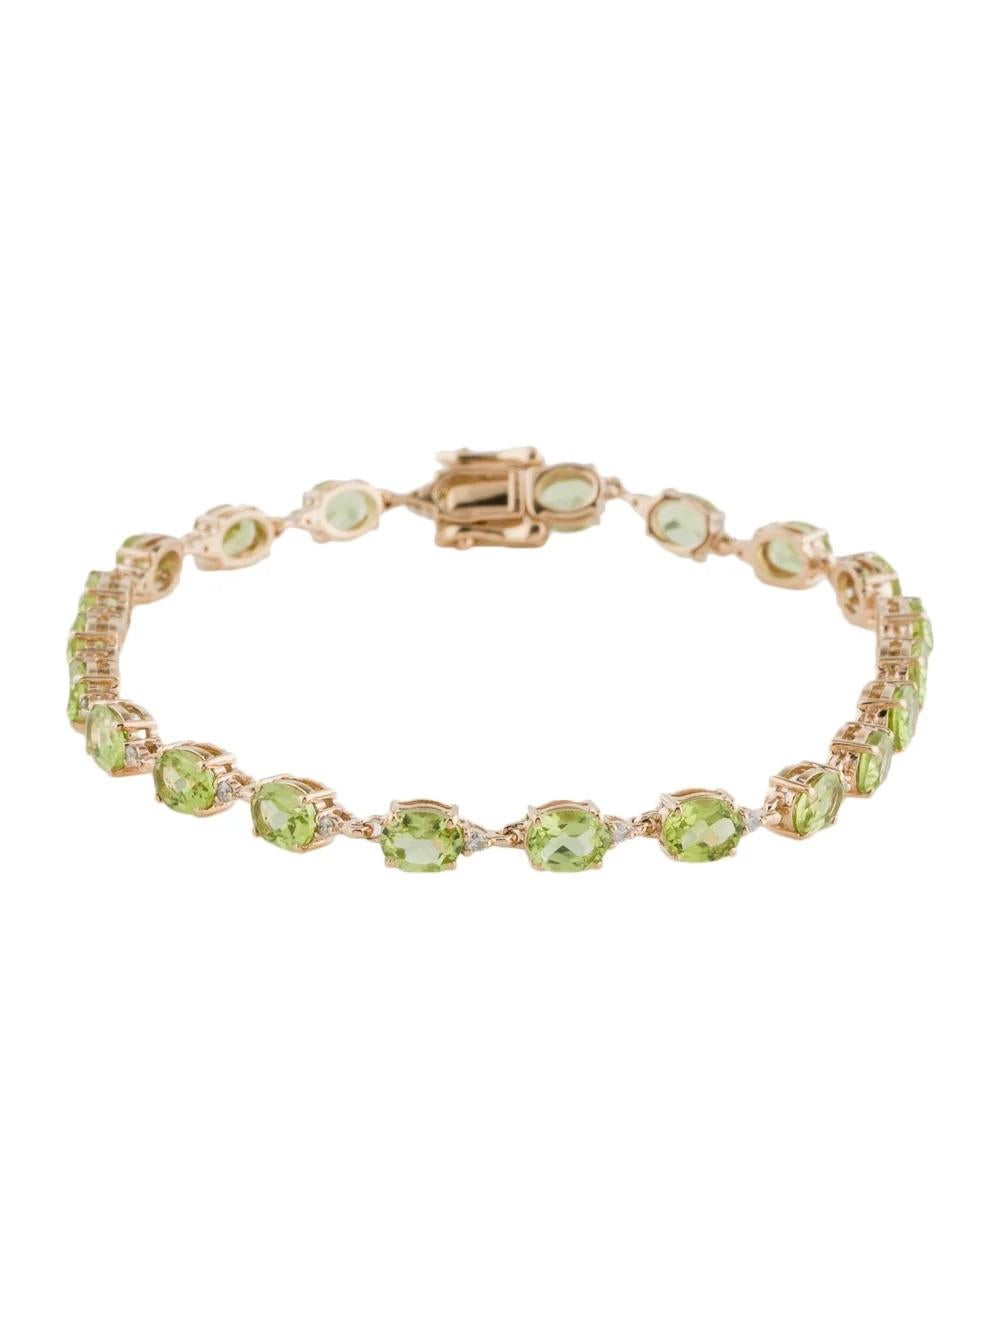 Enhance your jewelry collection with this elegant 14K Yellow Gold Link Bracelet adorned with captivating Oval Modified Brilliant Peridots and sparkling Diamonds. Crafted to perfection, this bracelet exudes sophistication and charm, perfect for